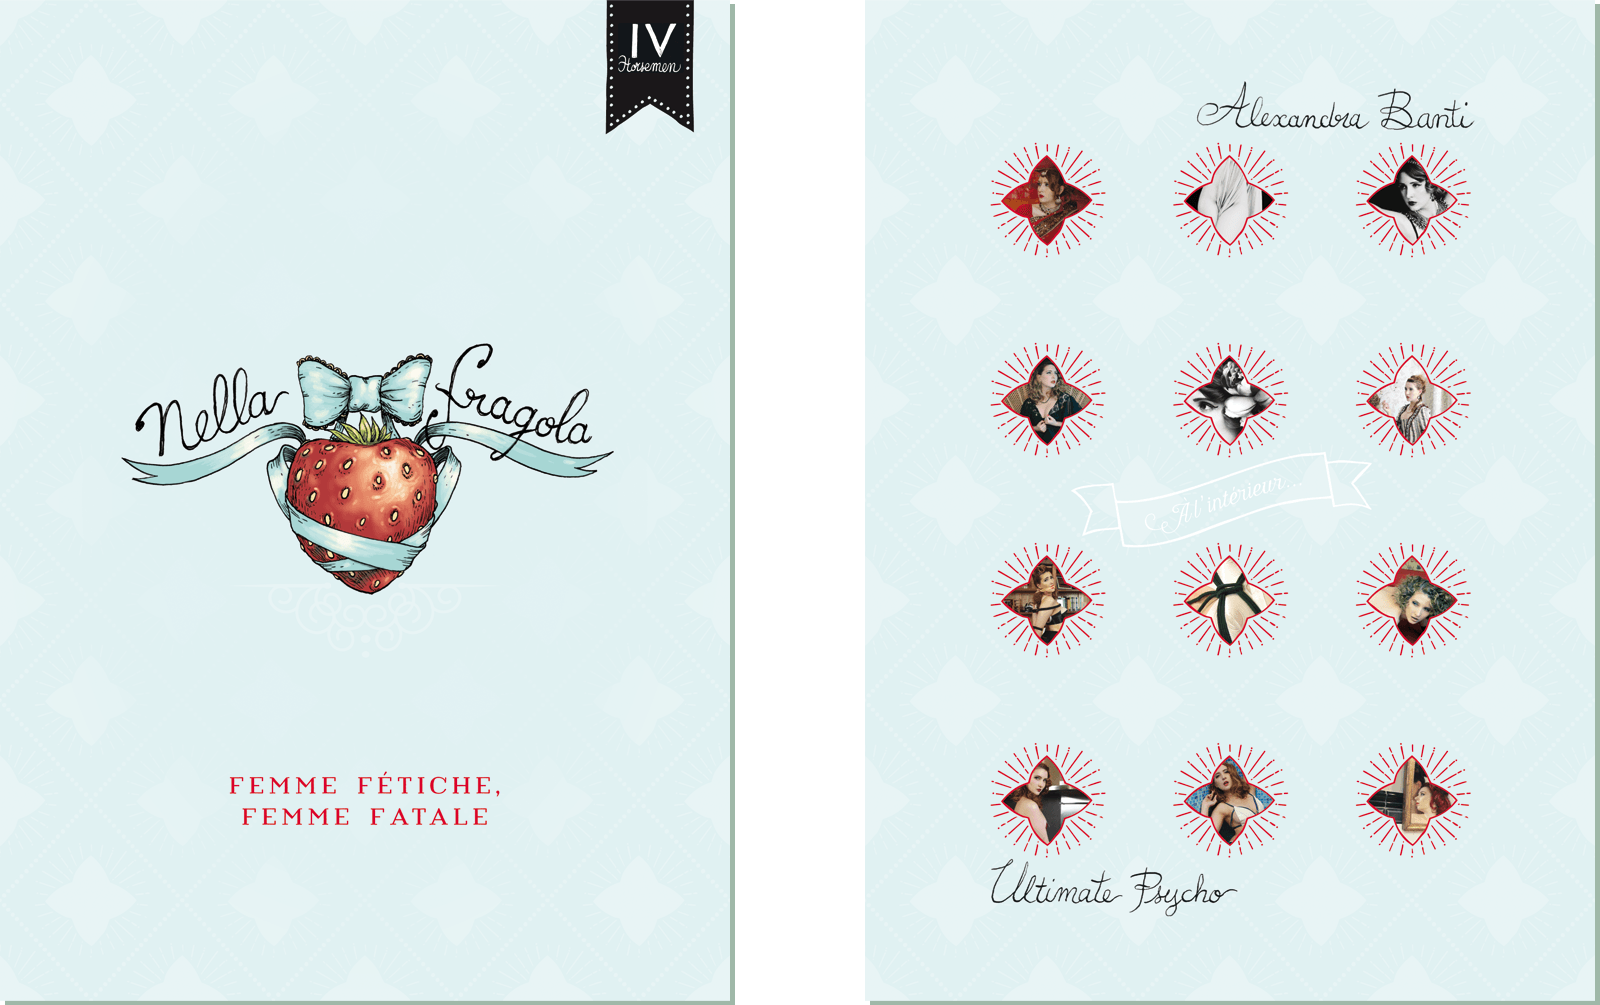 Nella Fragola Portfolio Folder Front and Back Cover, and base for her current visual identity.